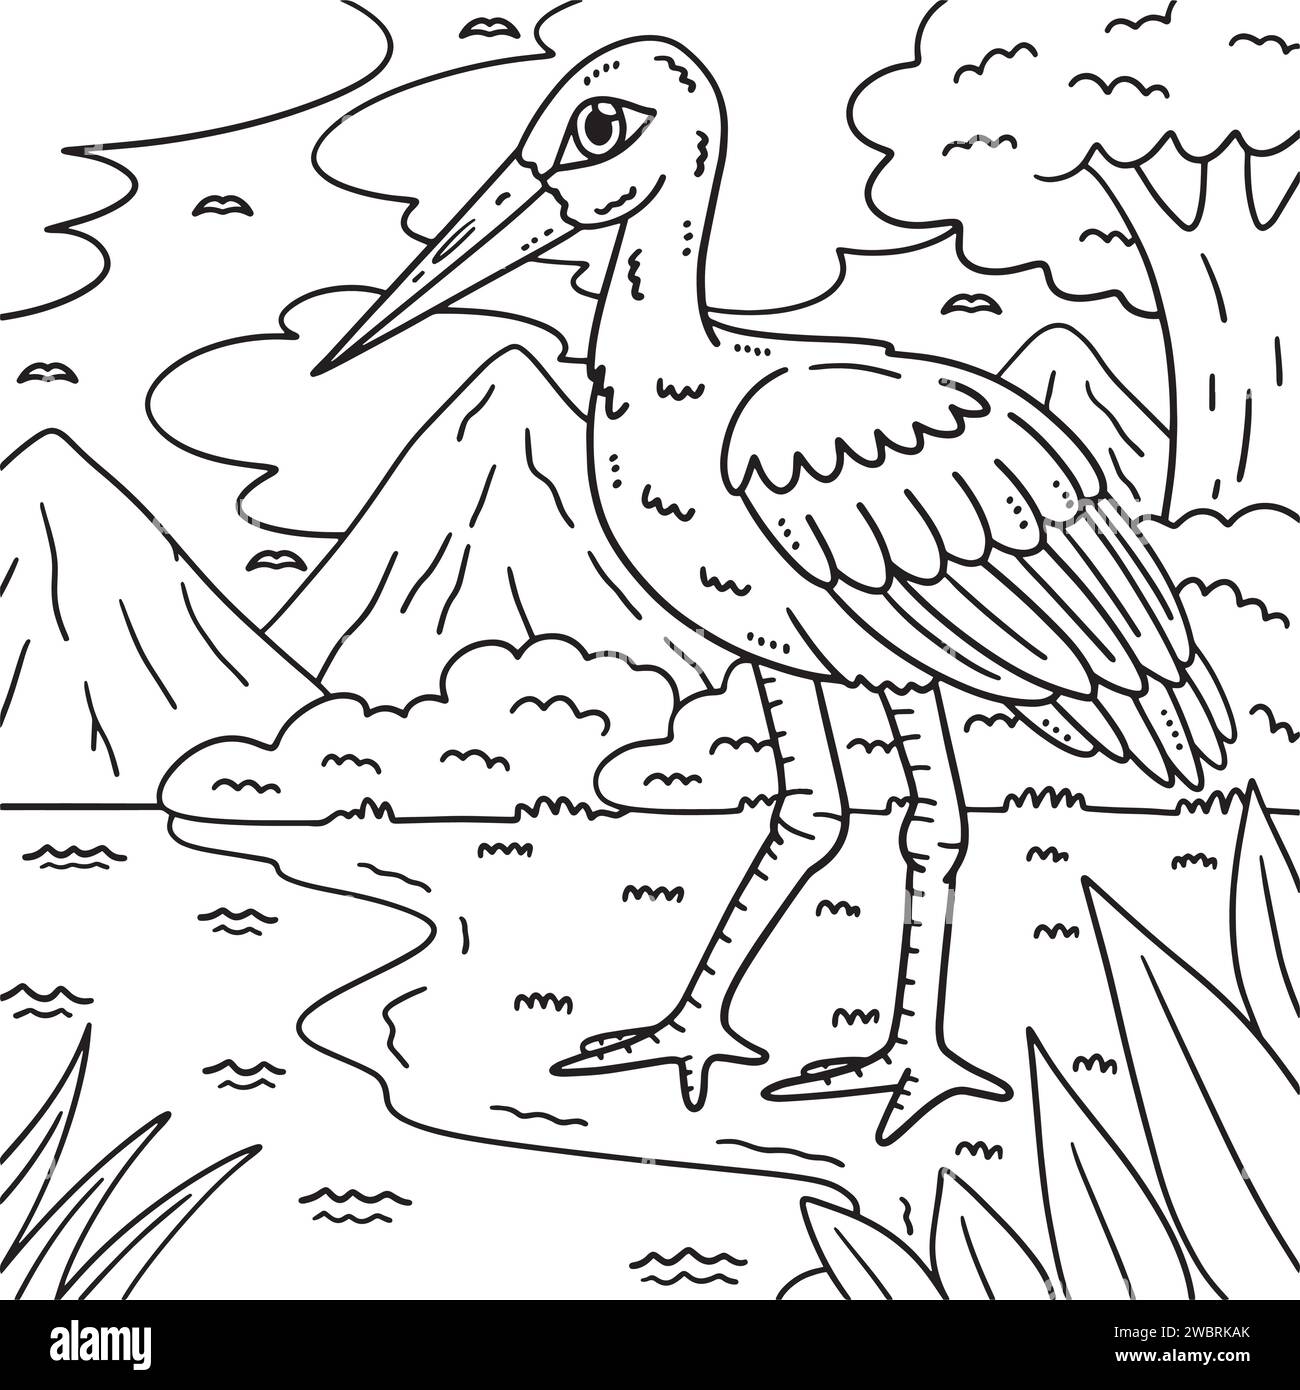 White Stork Bird Coloring Page for Kids Stock Vector